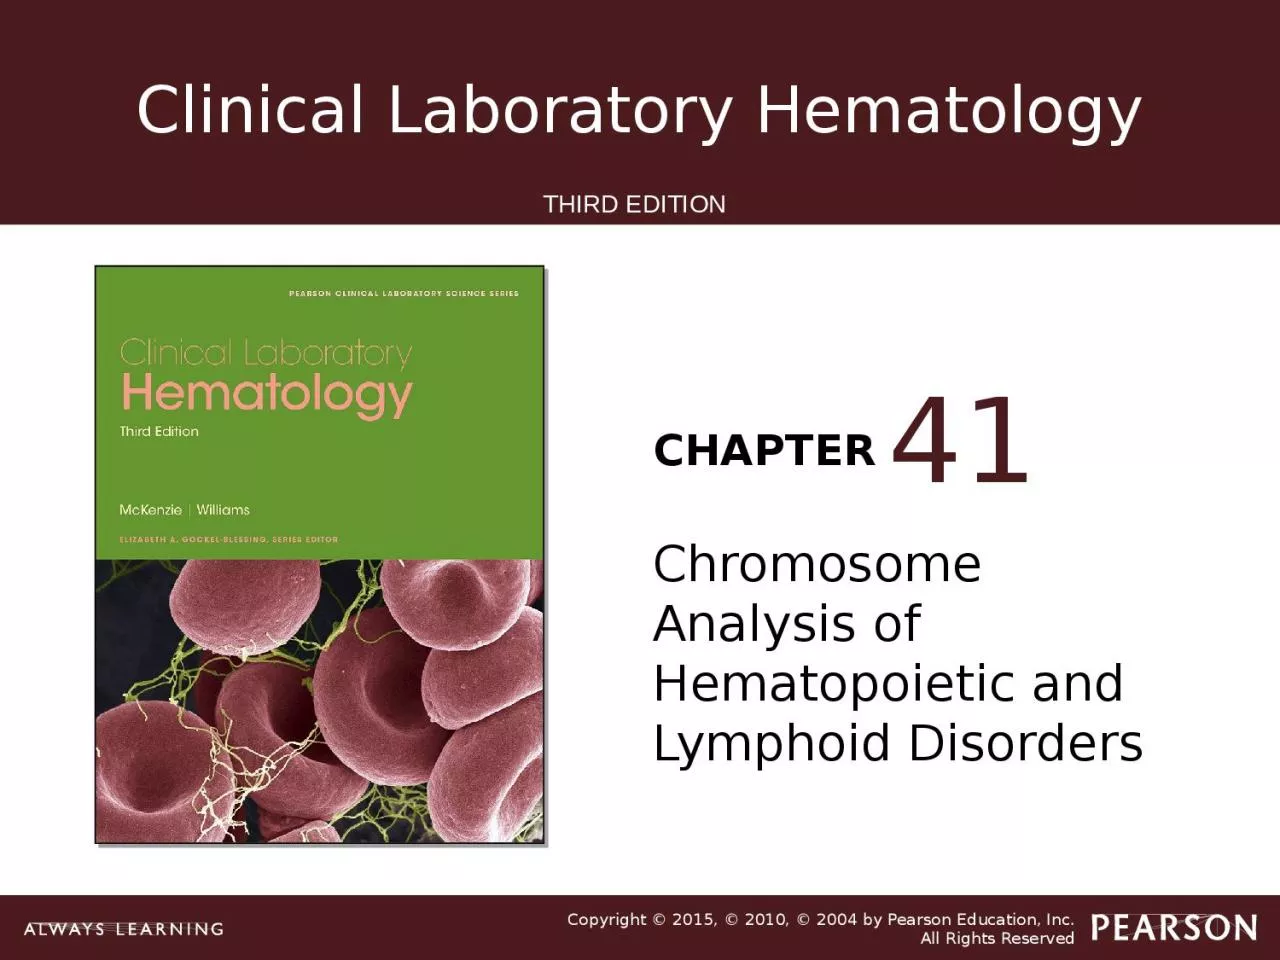 Chromosome Analysis of Hematopoietic and Lymphoid Disorders